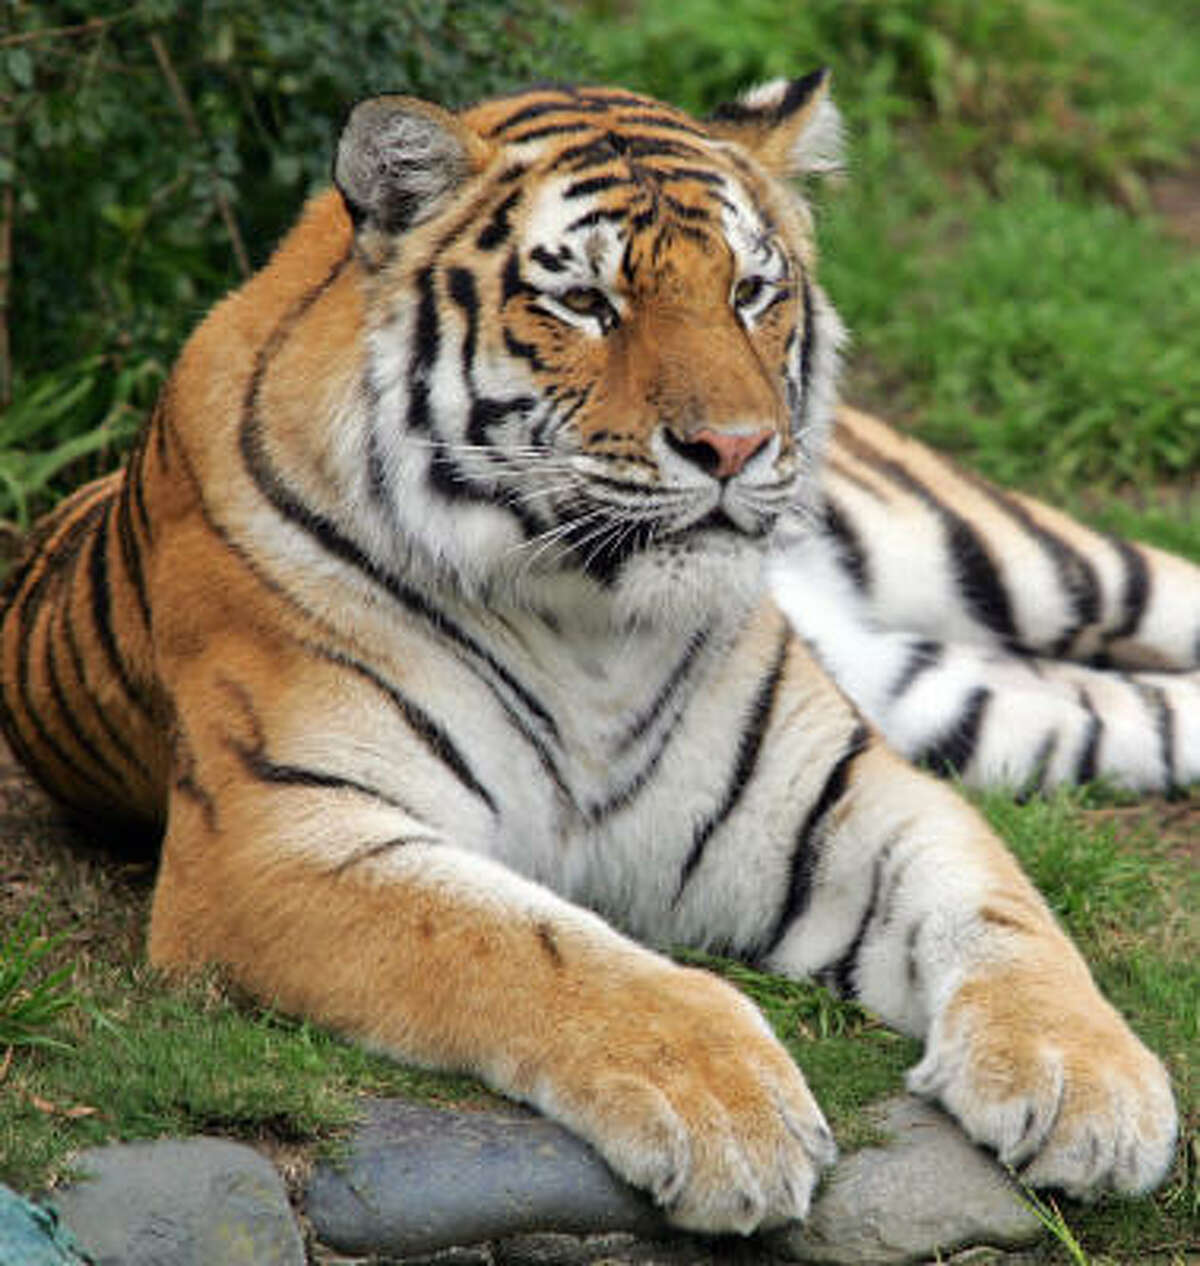 Tatiana, a Siberian tiger at the San Francisco Zoo shown in this file photo, was one of two such animals in the zoo's collections, according to its Web site.